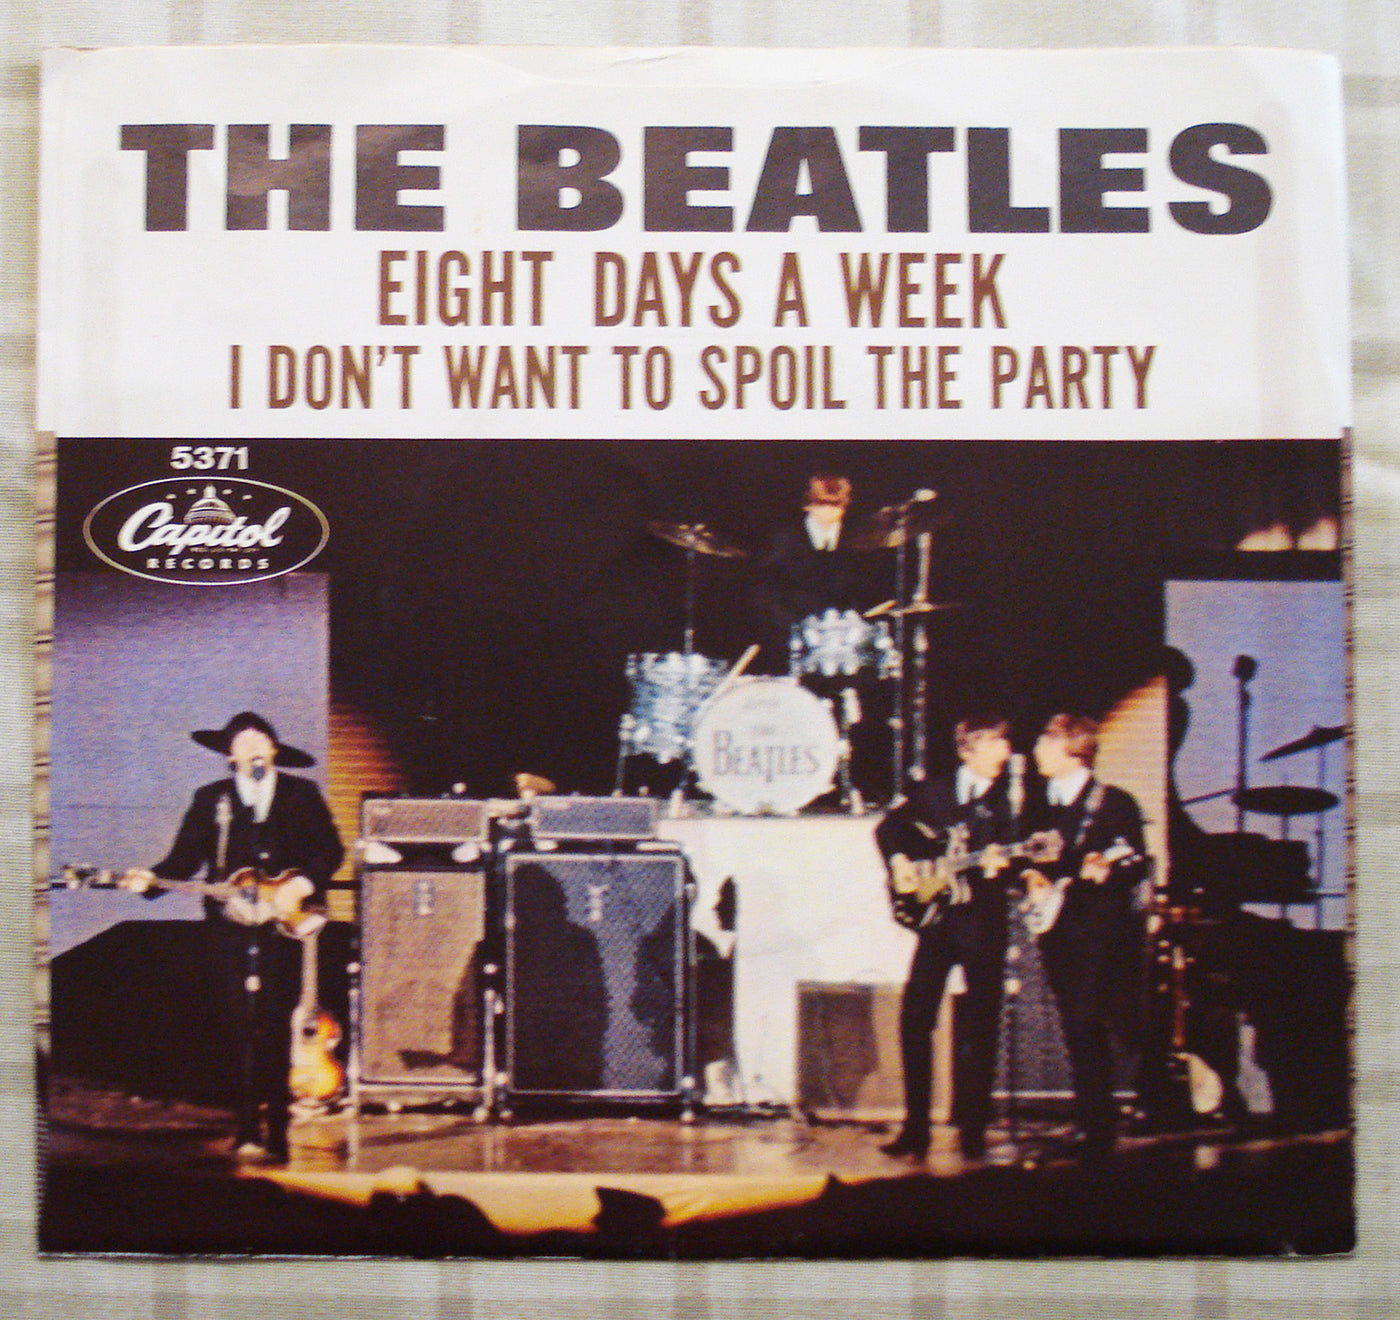 The Beatles Eight Days A Week-I Don't Want To Spoil The Party (1964) Vinyl Single 45rpm 5371